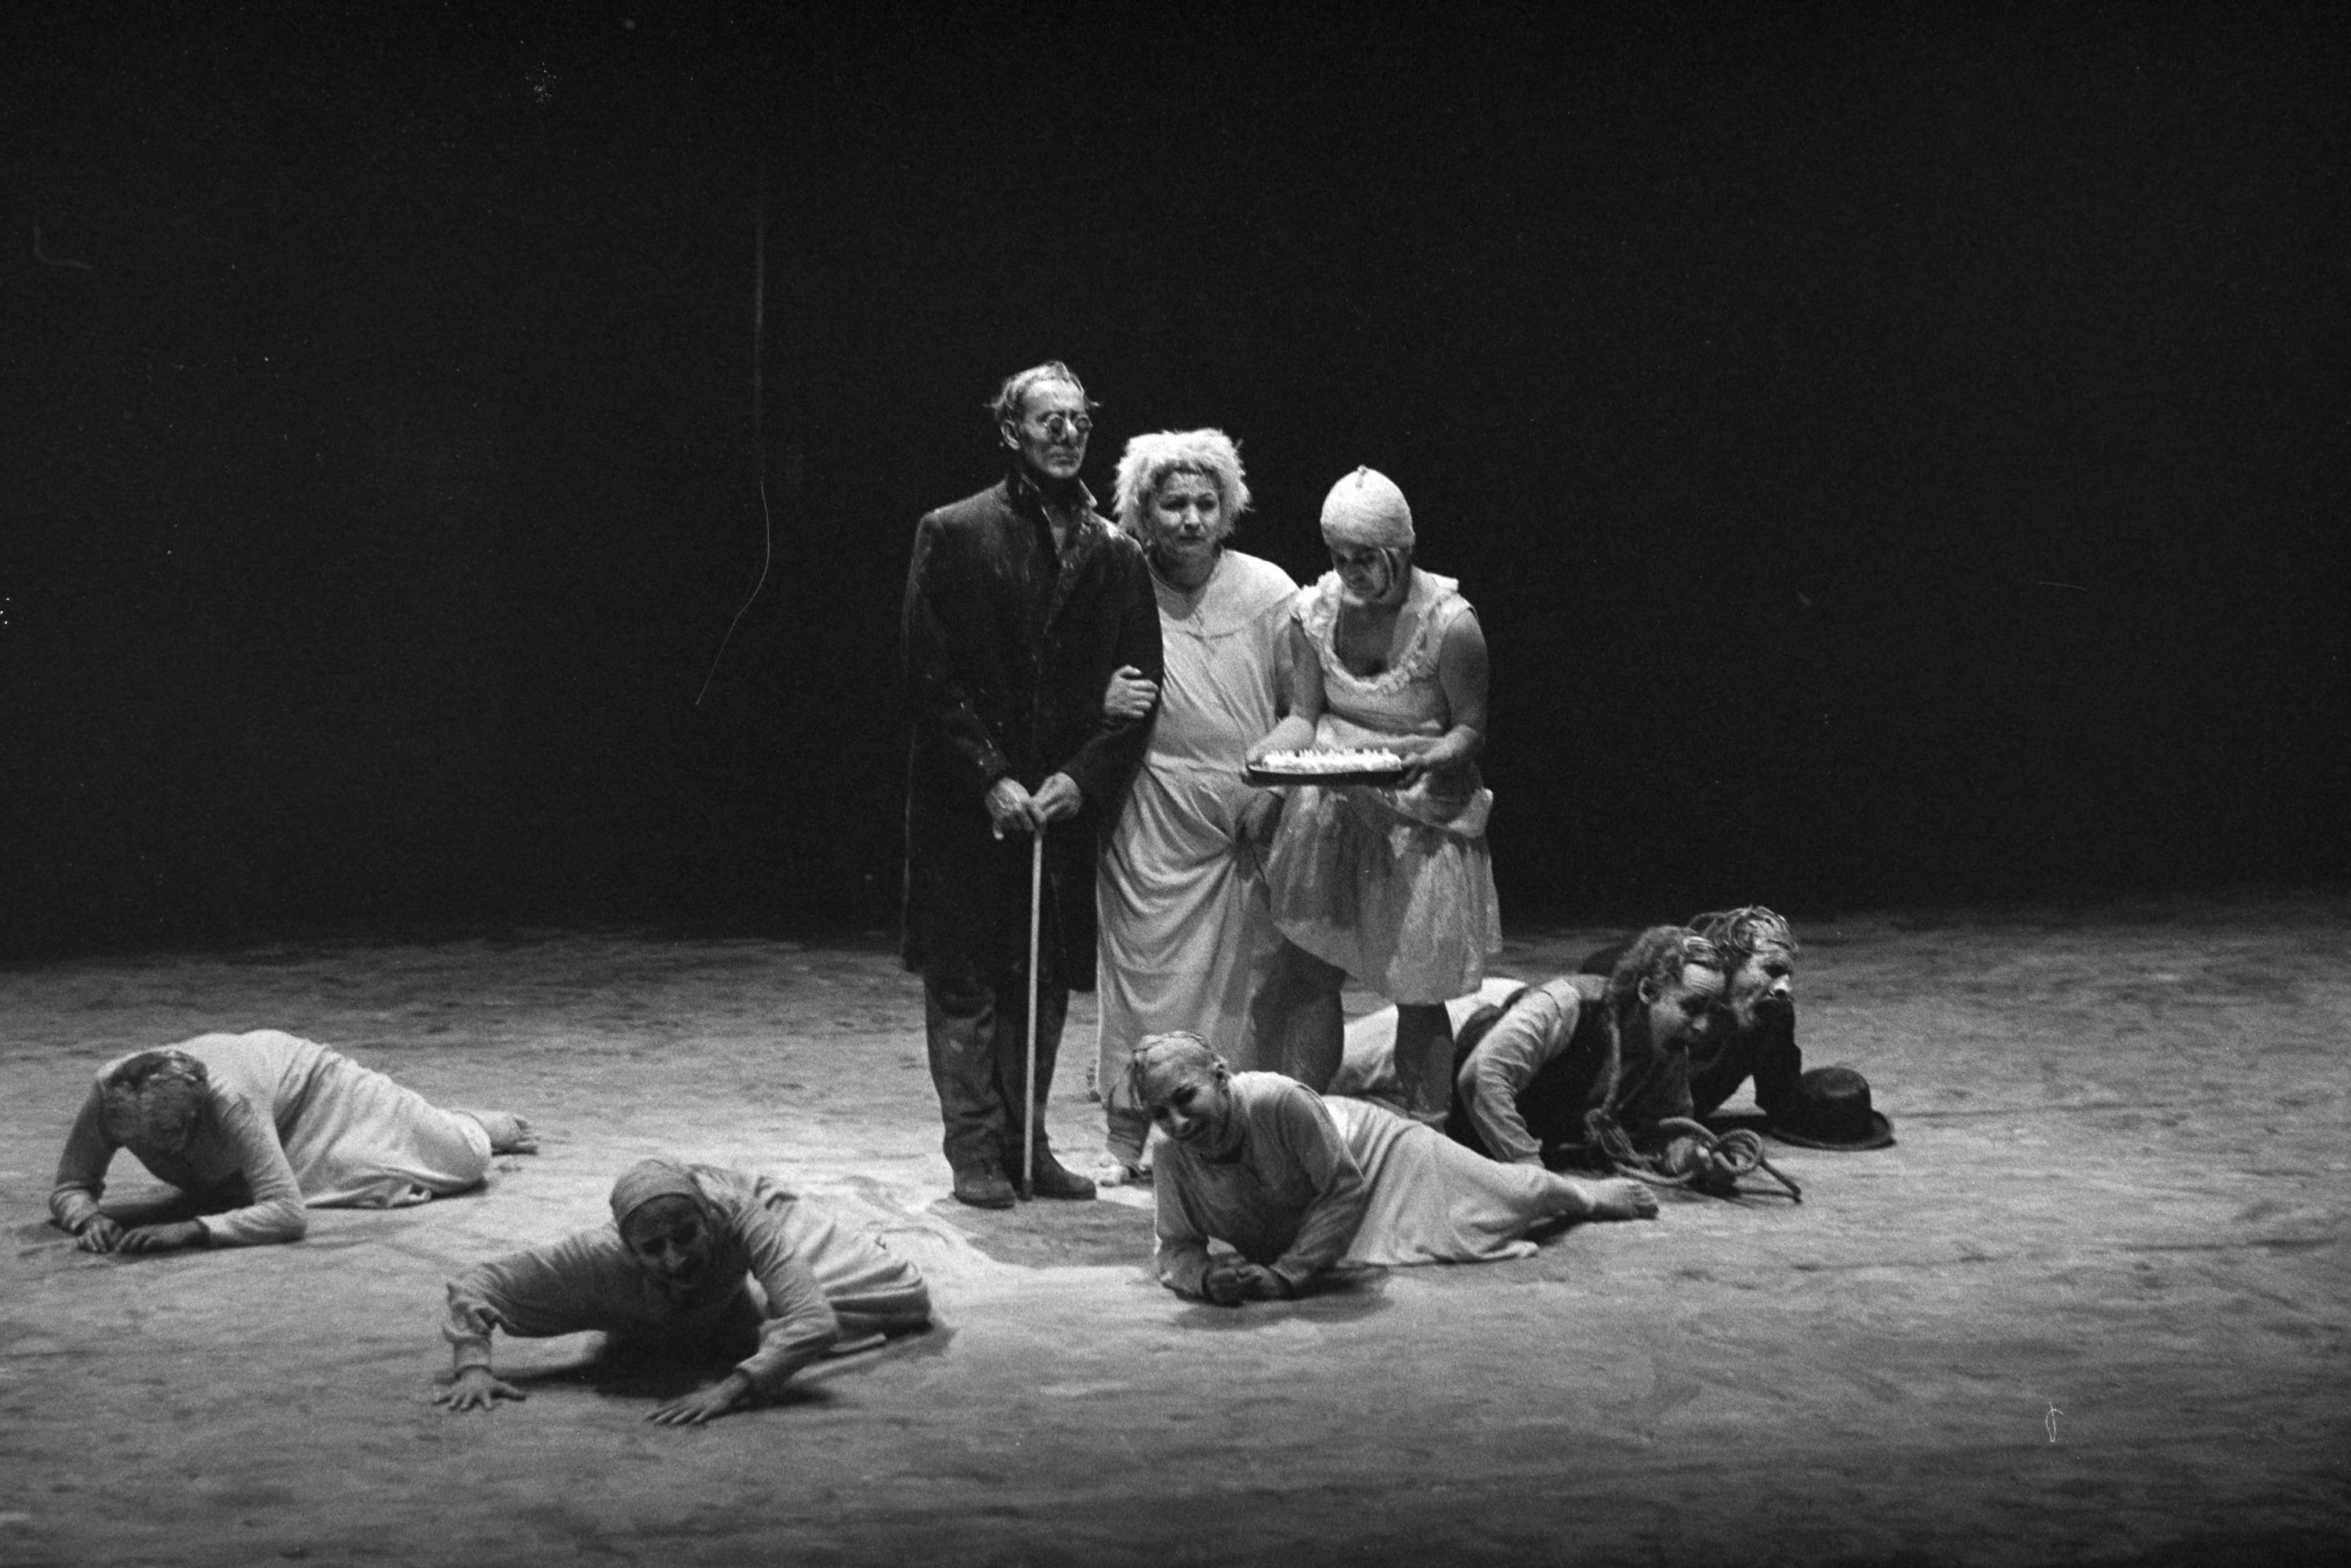 Three dancers on stage, others on the floor for Maguy Marin's May B at the Maison des arts in Créteil in 1991.